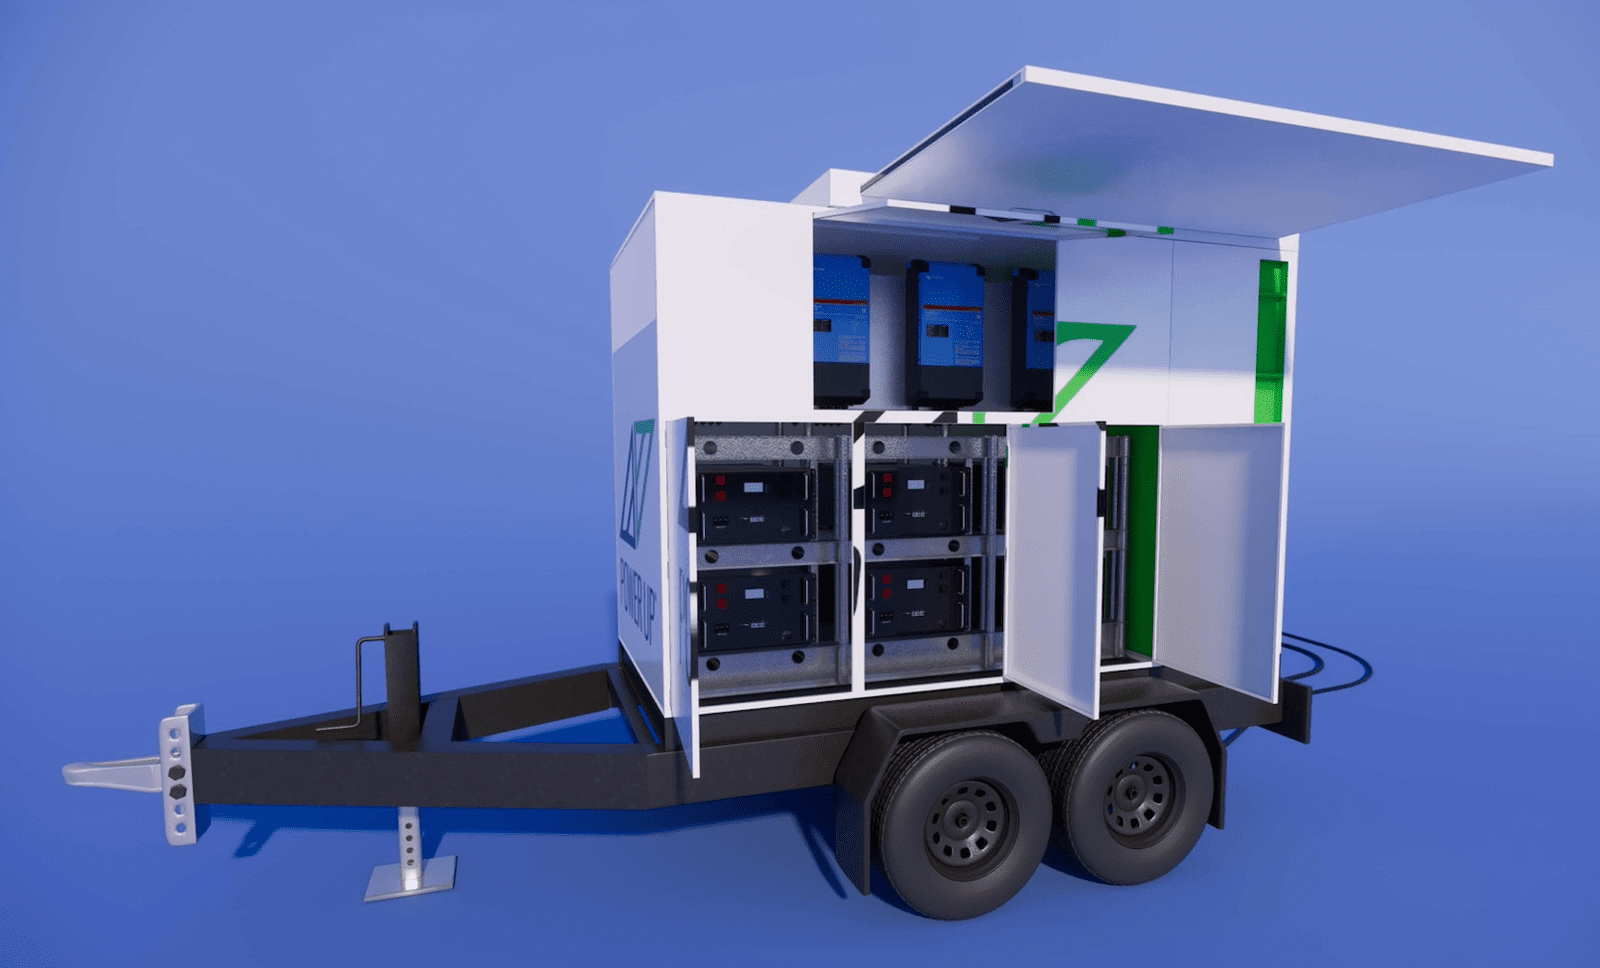 Mobile BESS - Why is Energy Storage Needed?